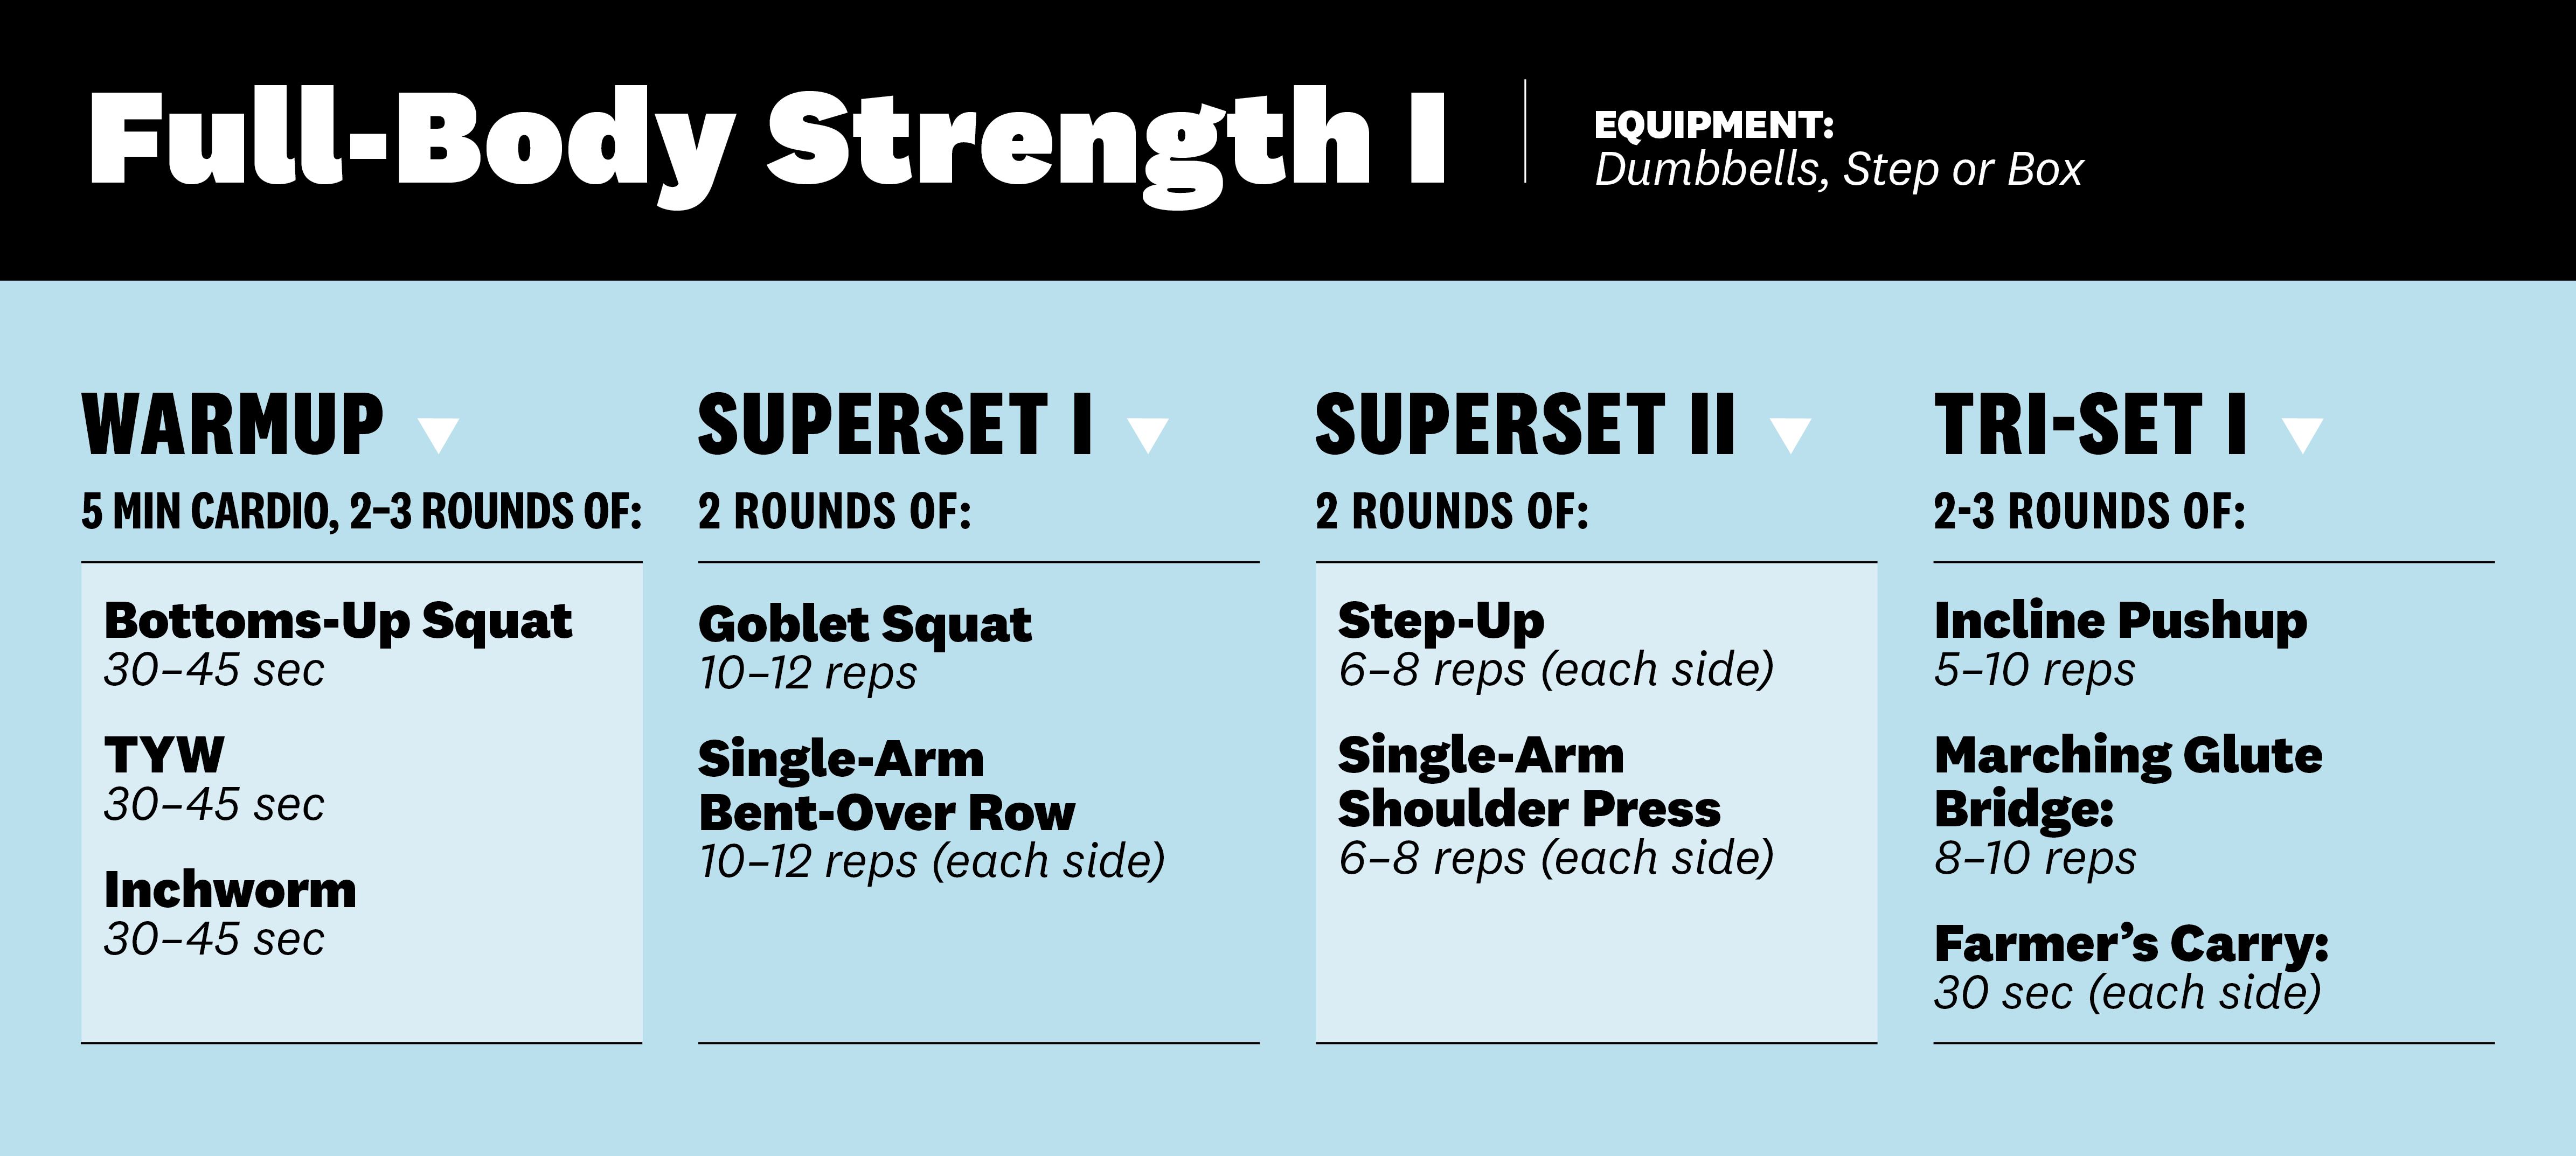 How to Get Stronger Arms: A Step-by-Step Guide  Arms workout plan, Strong  arms, Strength training for beginners